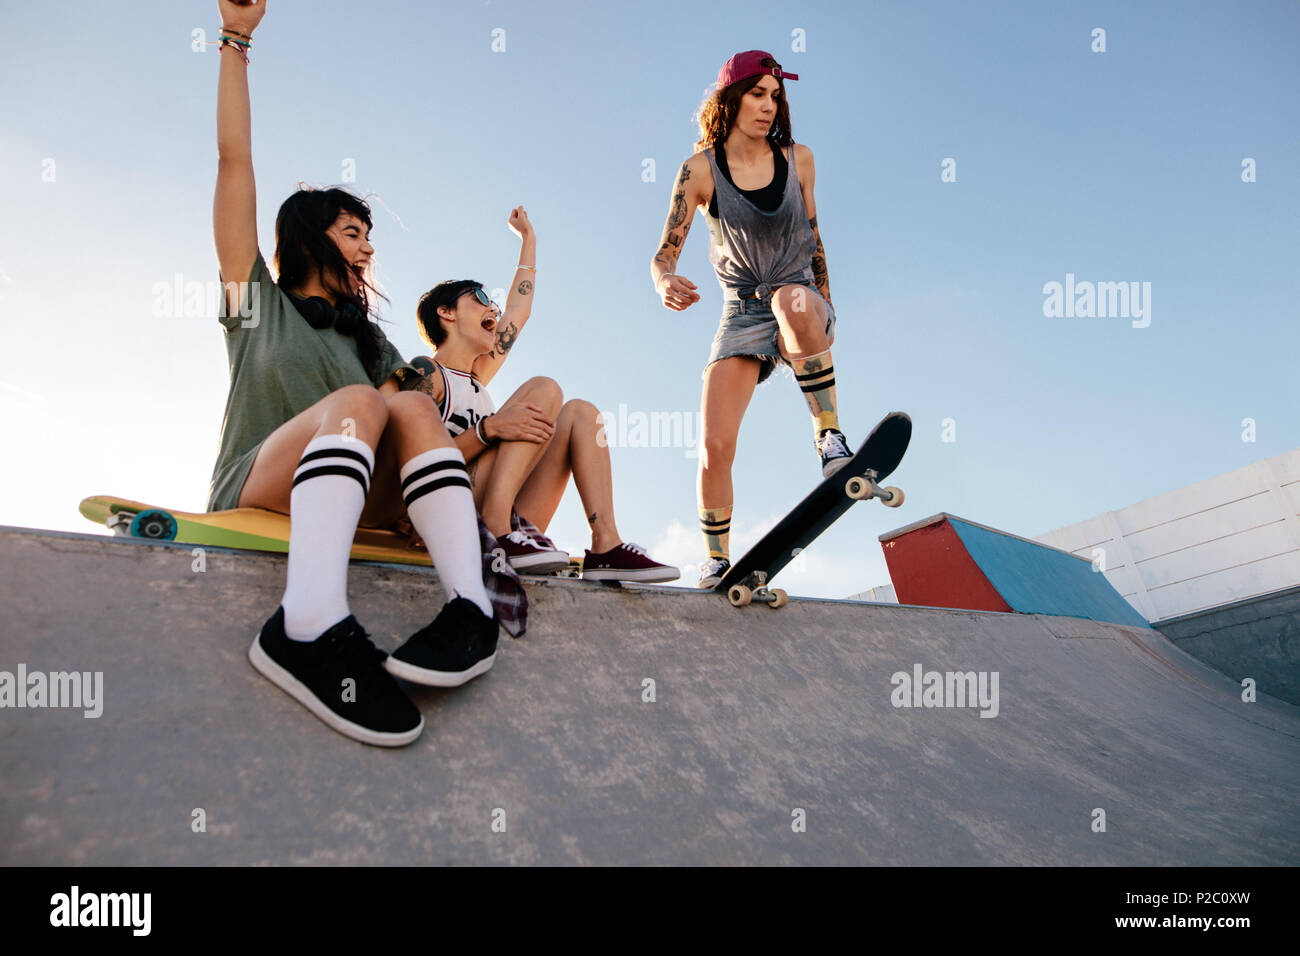 Three young female friends at skate park. Skater girl starting her routine with women friends cheering sitting on ramp. Stock Photo